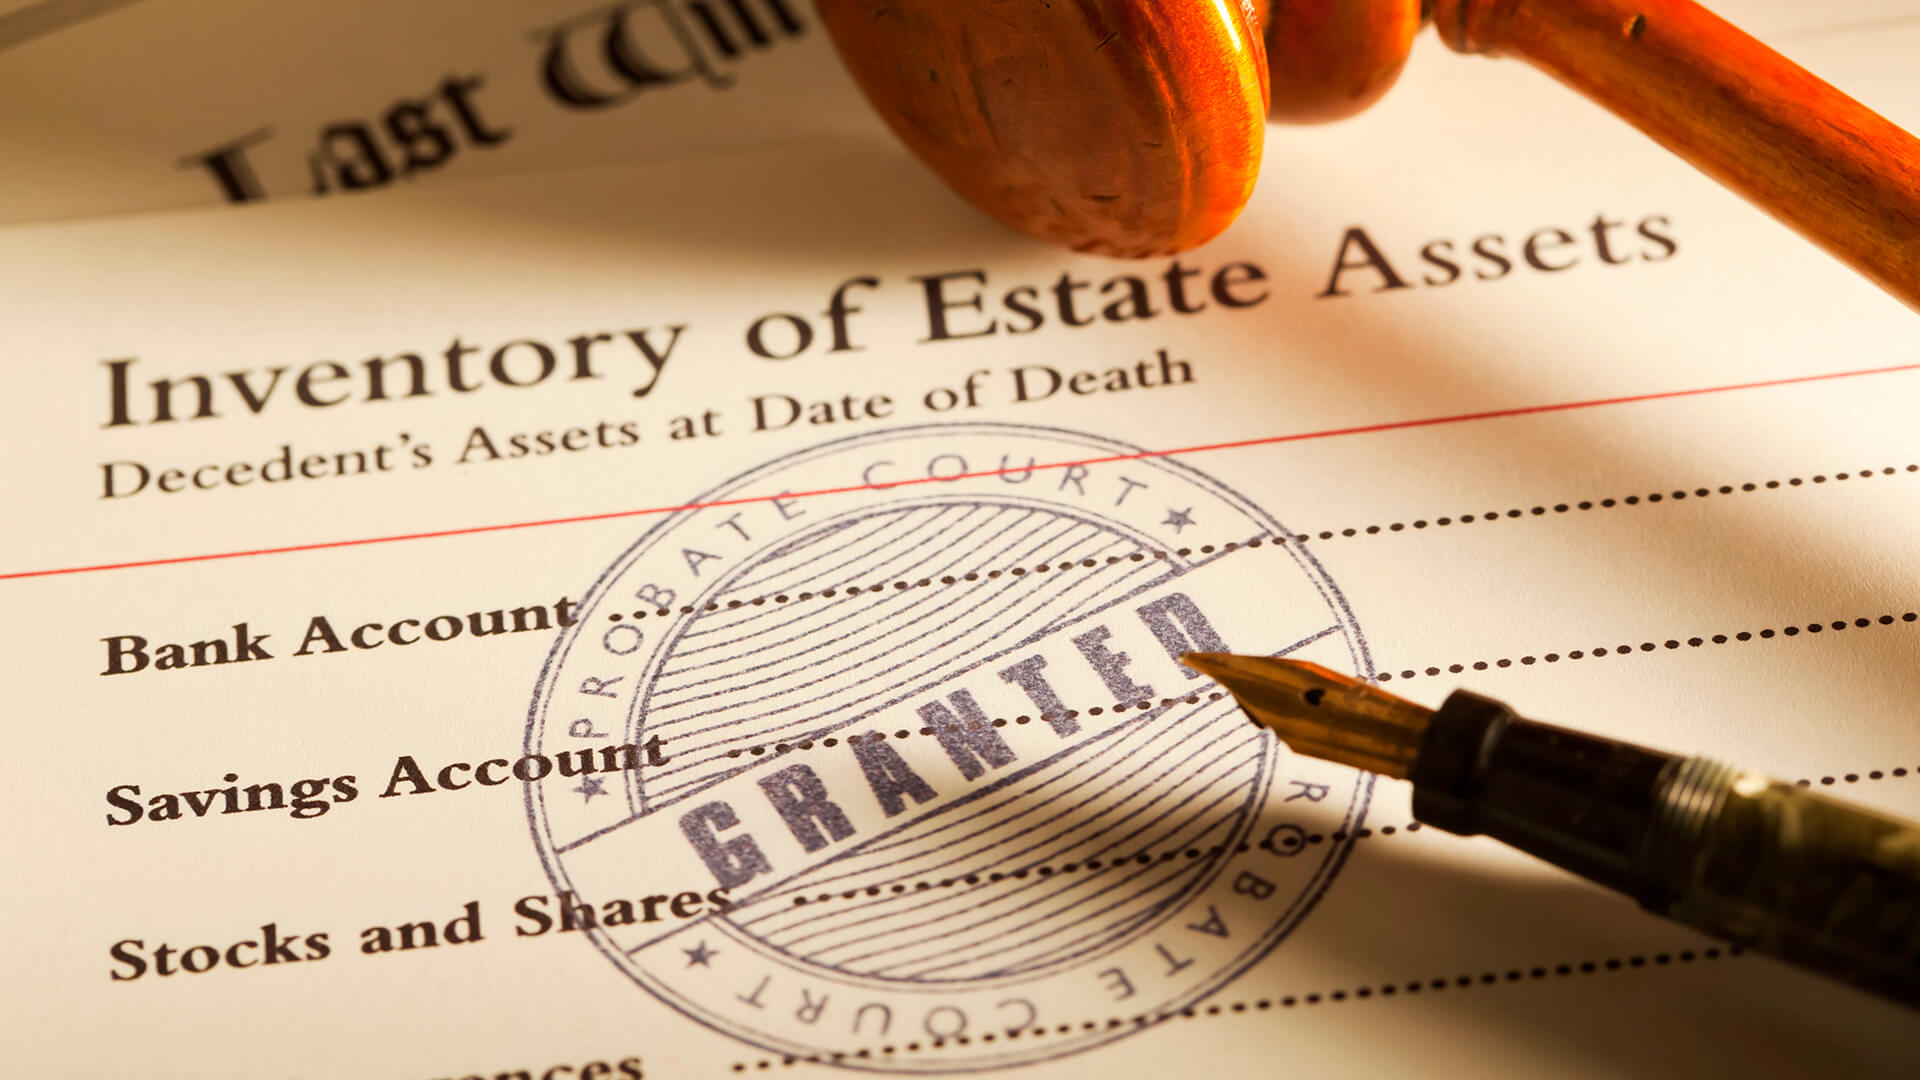 is it a good idea to tell your heirs about your estate plan?